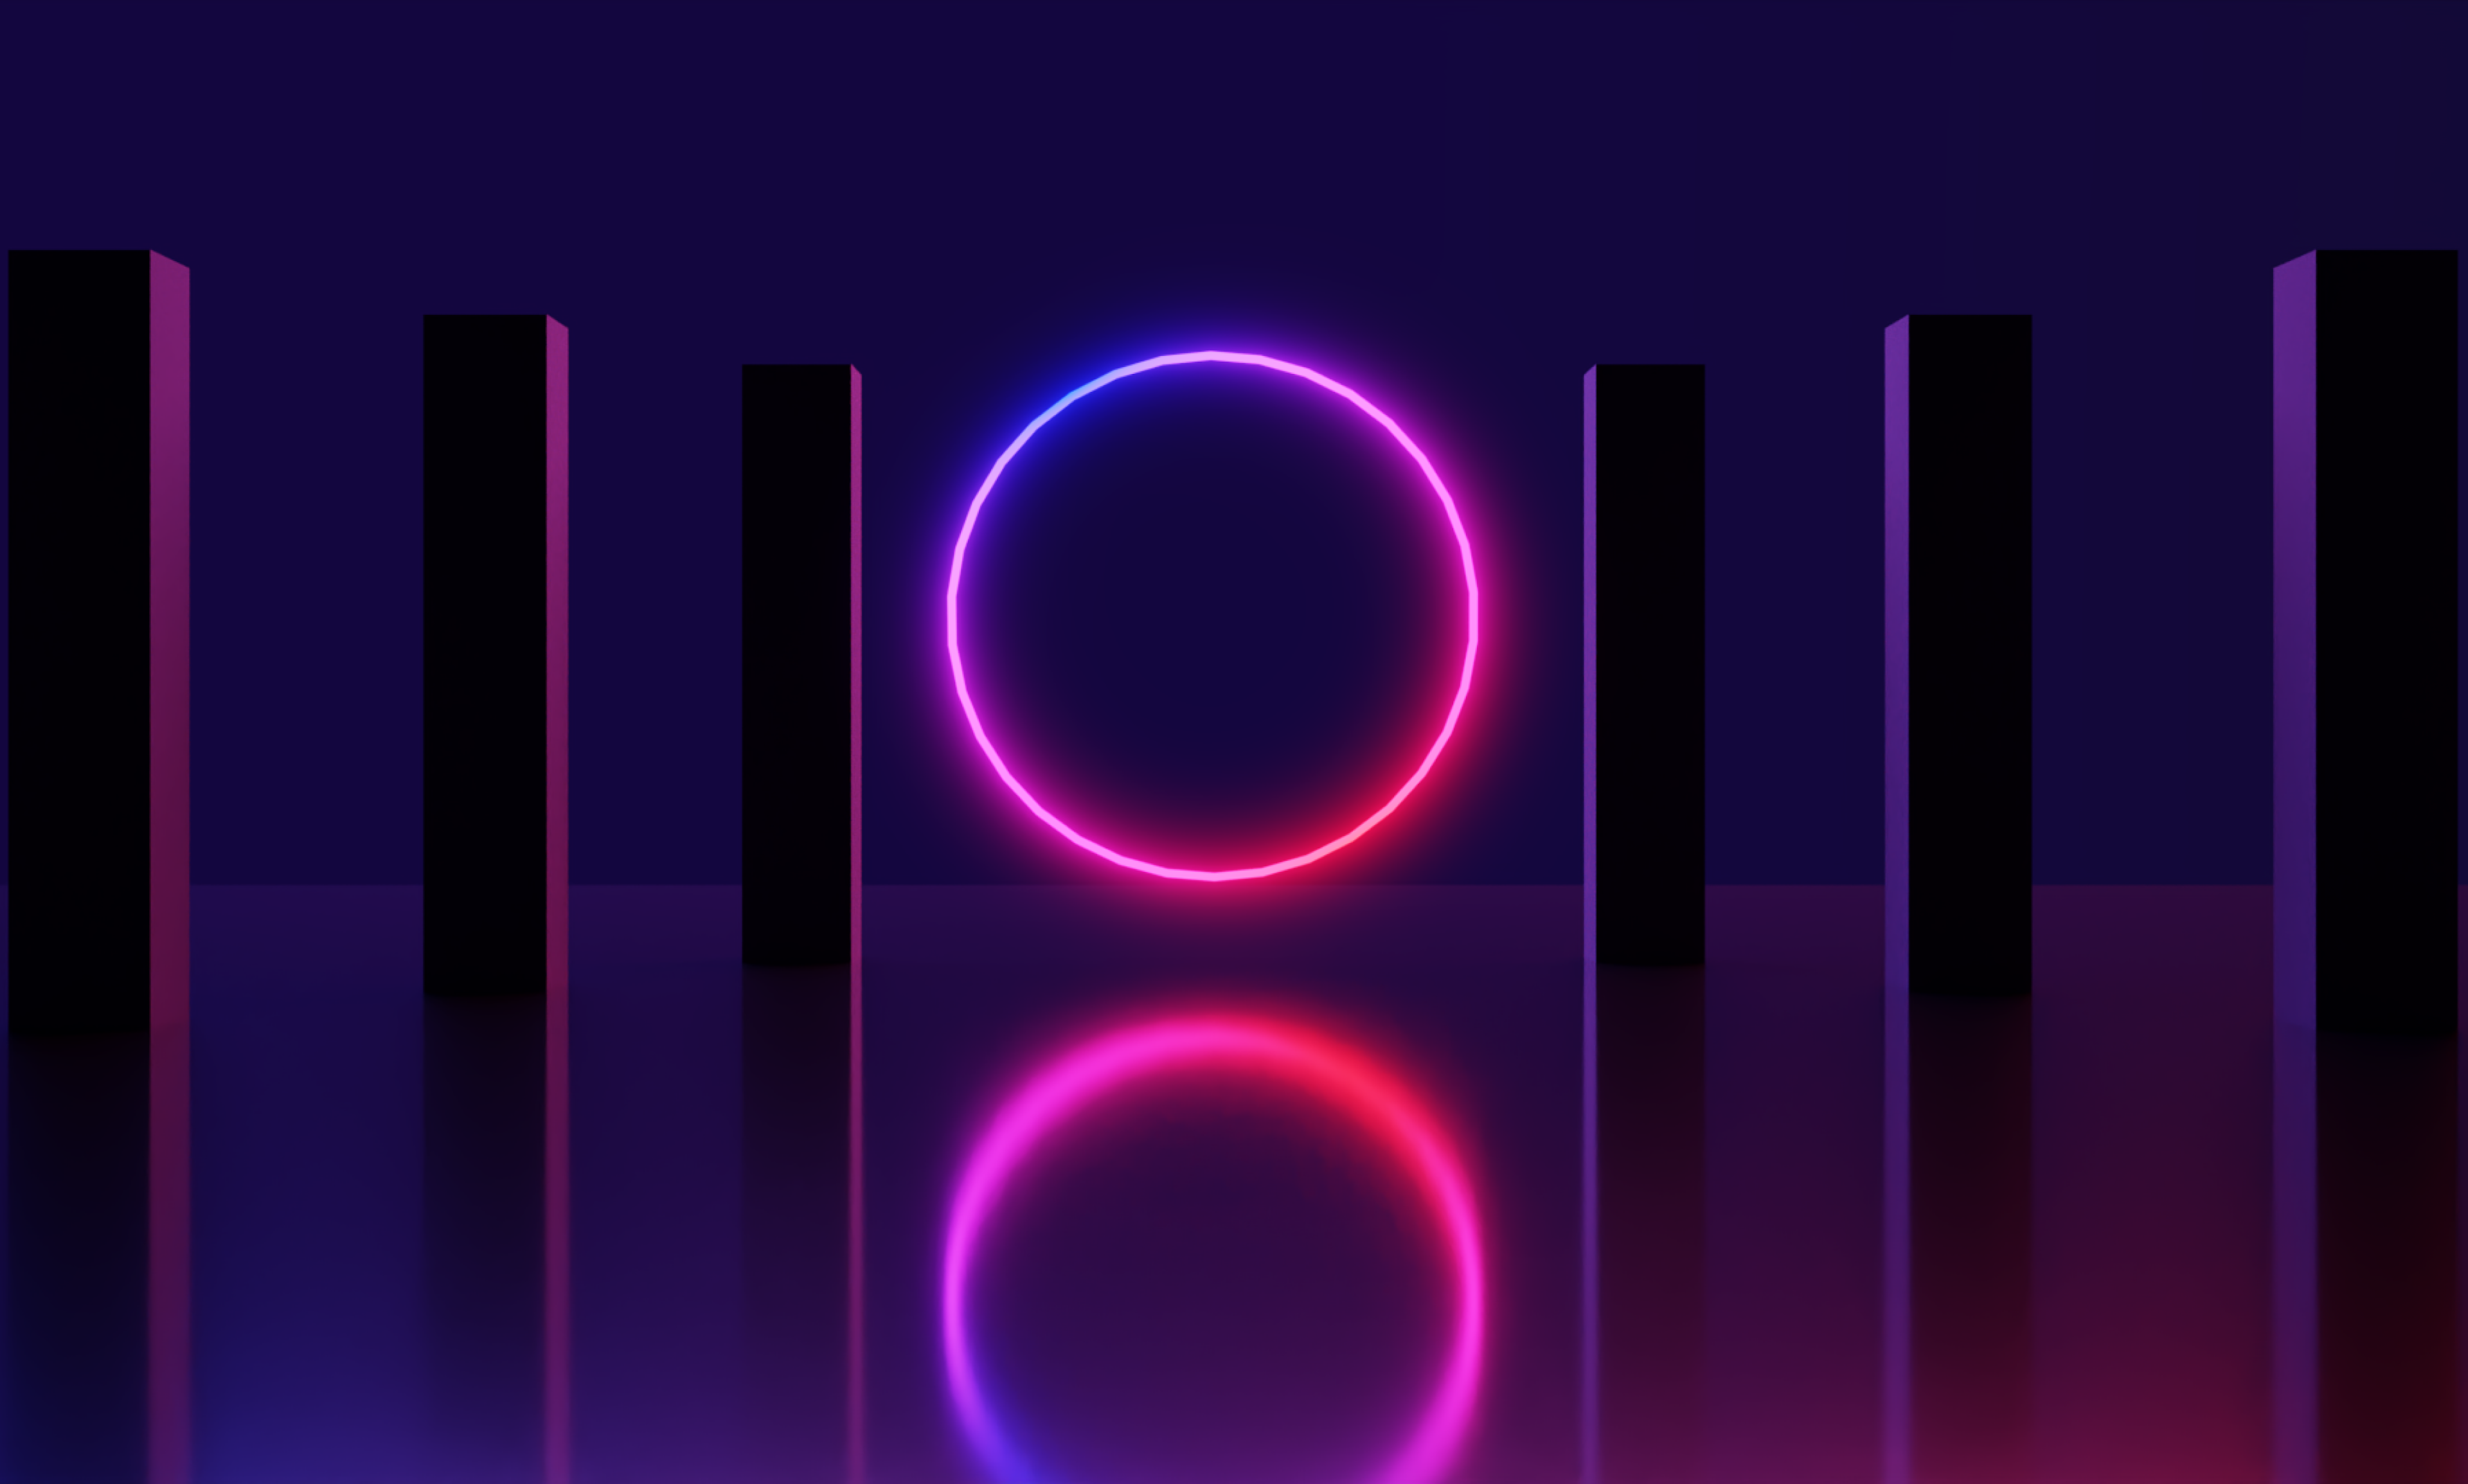 Glowing ring with adjacent pillars reflecting on a smooth surface.